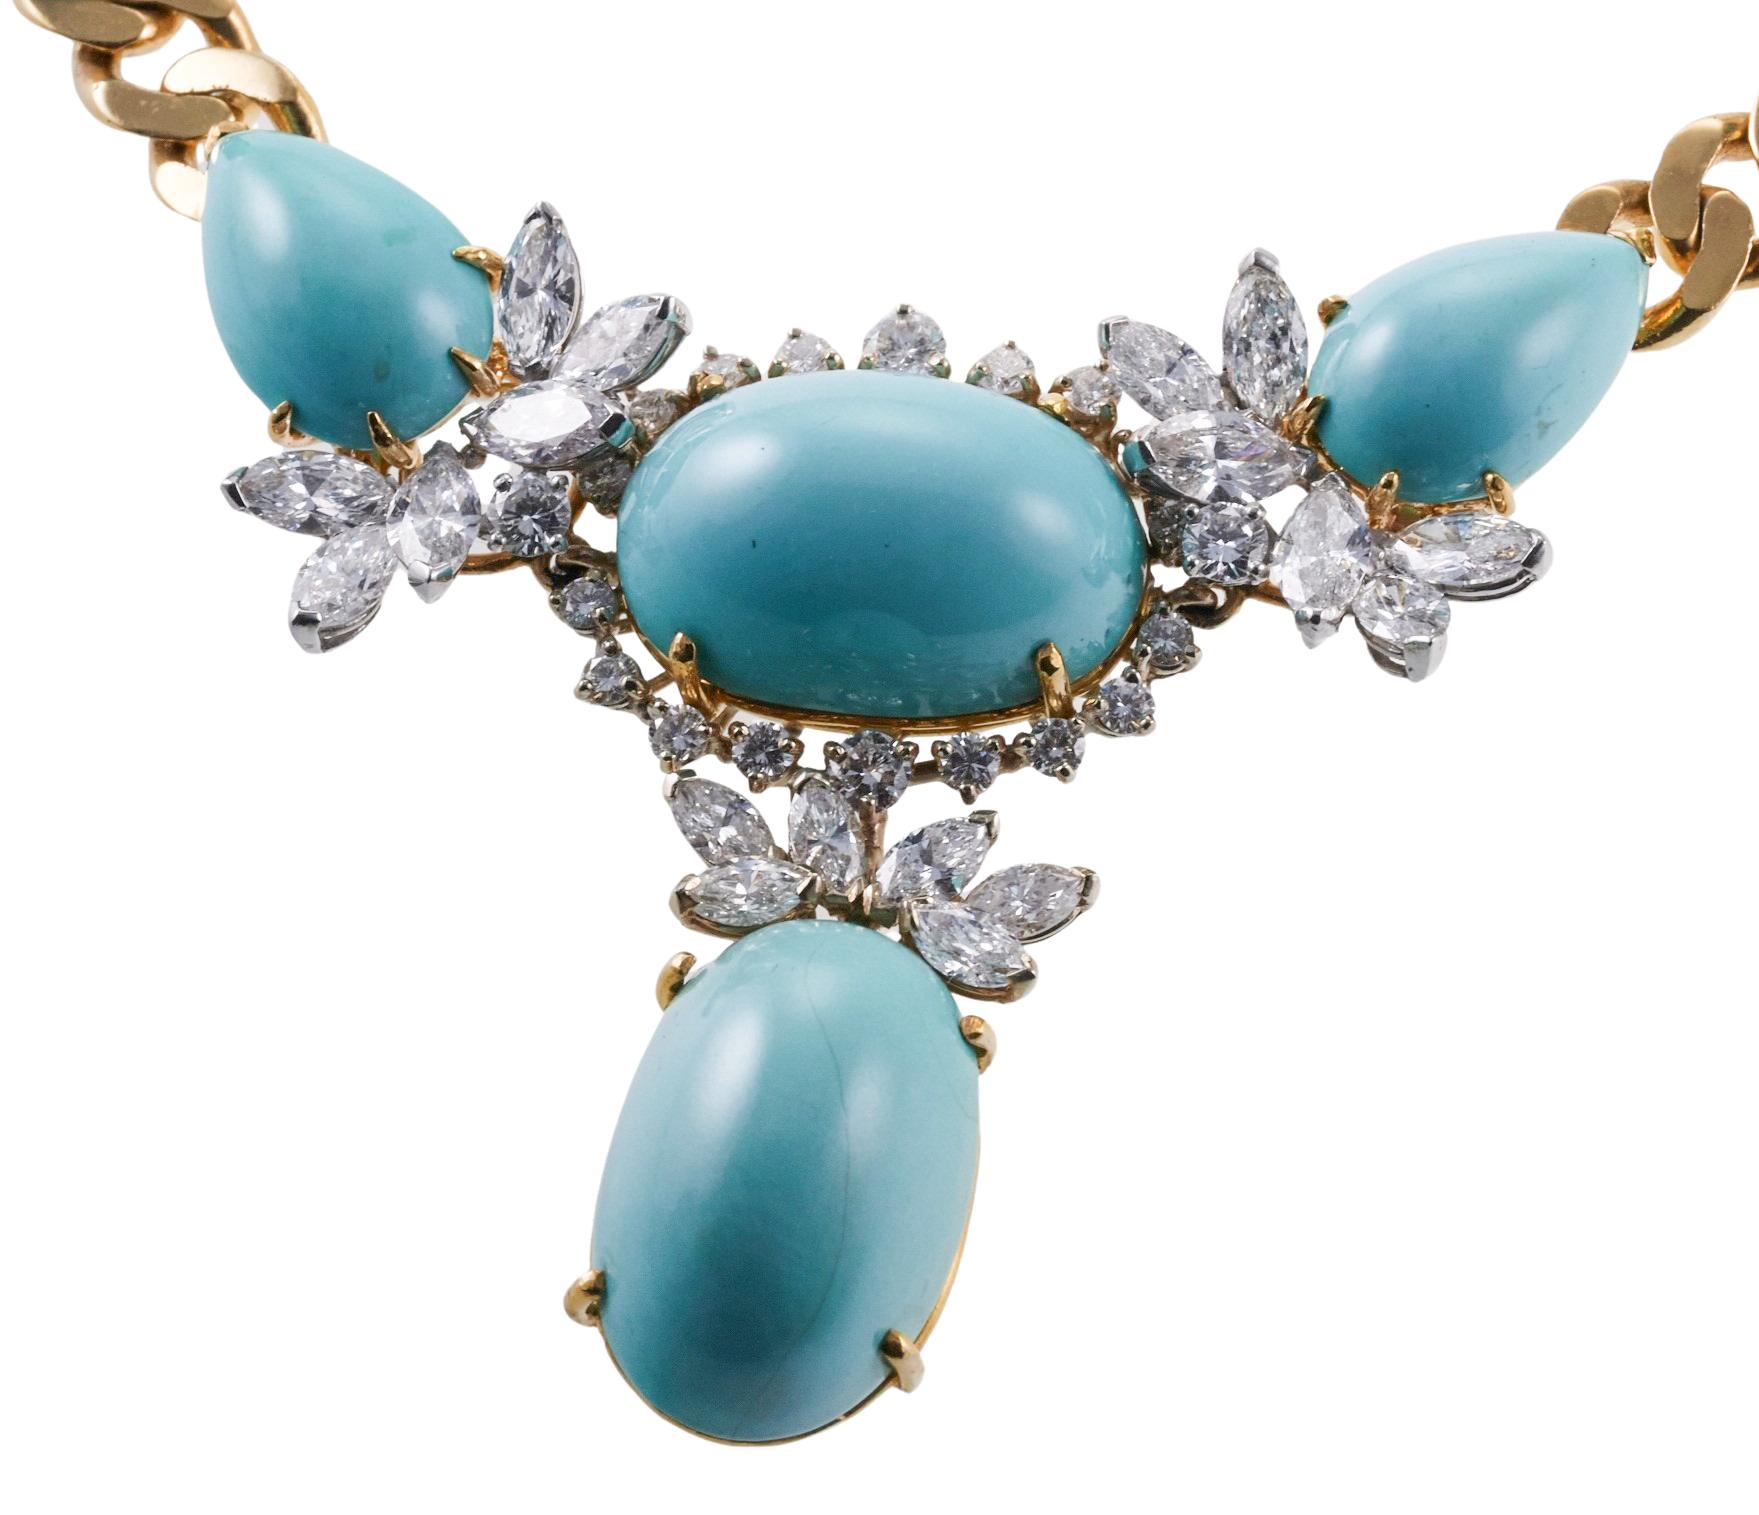 Impressive gorgeous 18k gold necklace, circa 1980s. Set with turquoise and a combination of marquise and round cut diamonds - total approximately 7.50ctw  H/Si1. Necklace is 17.5